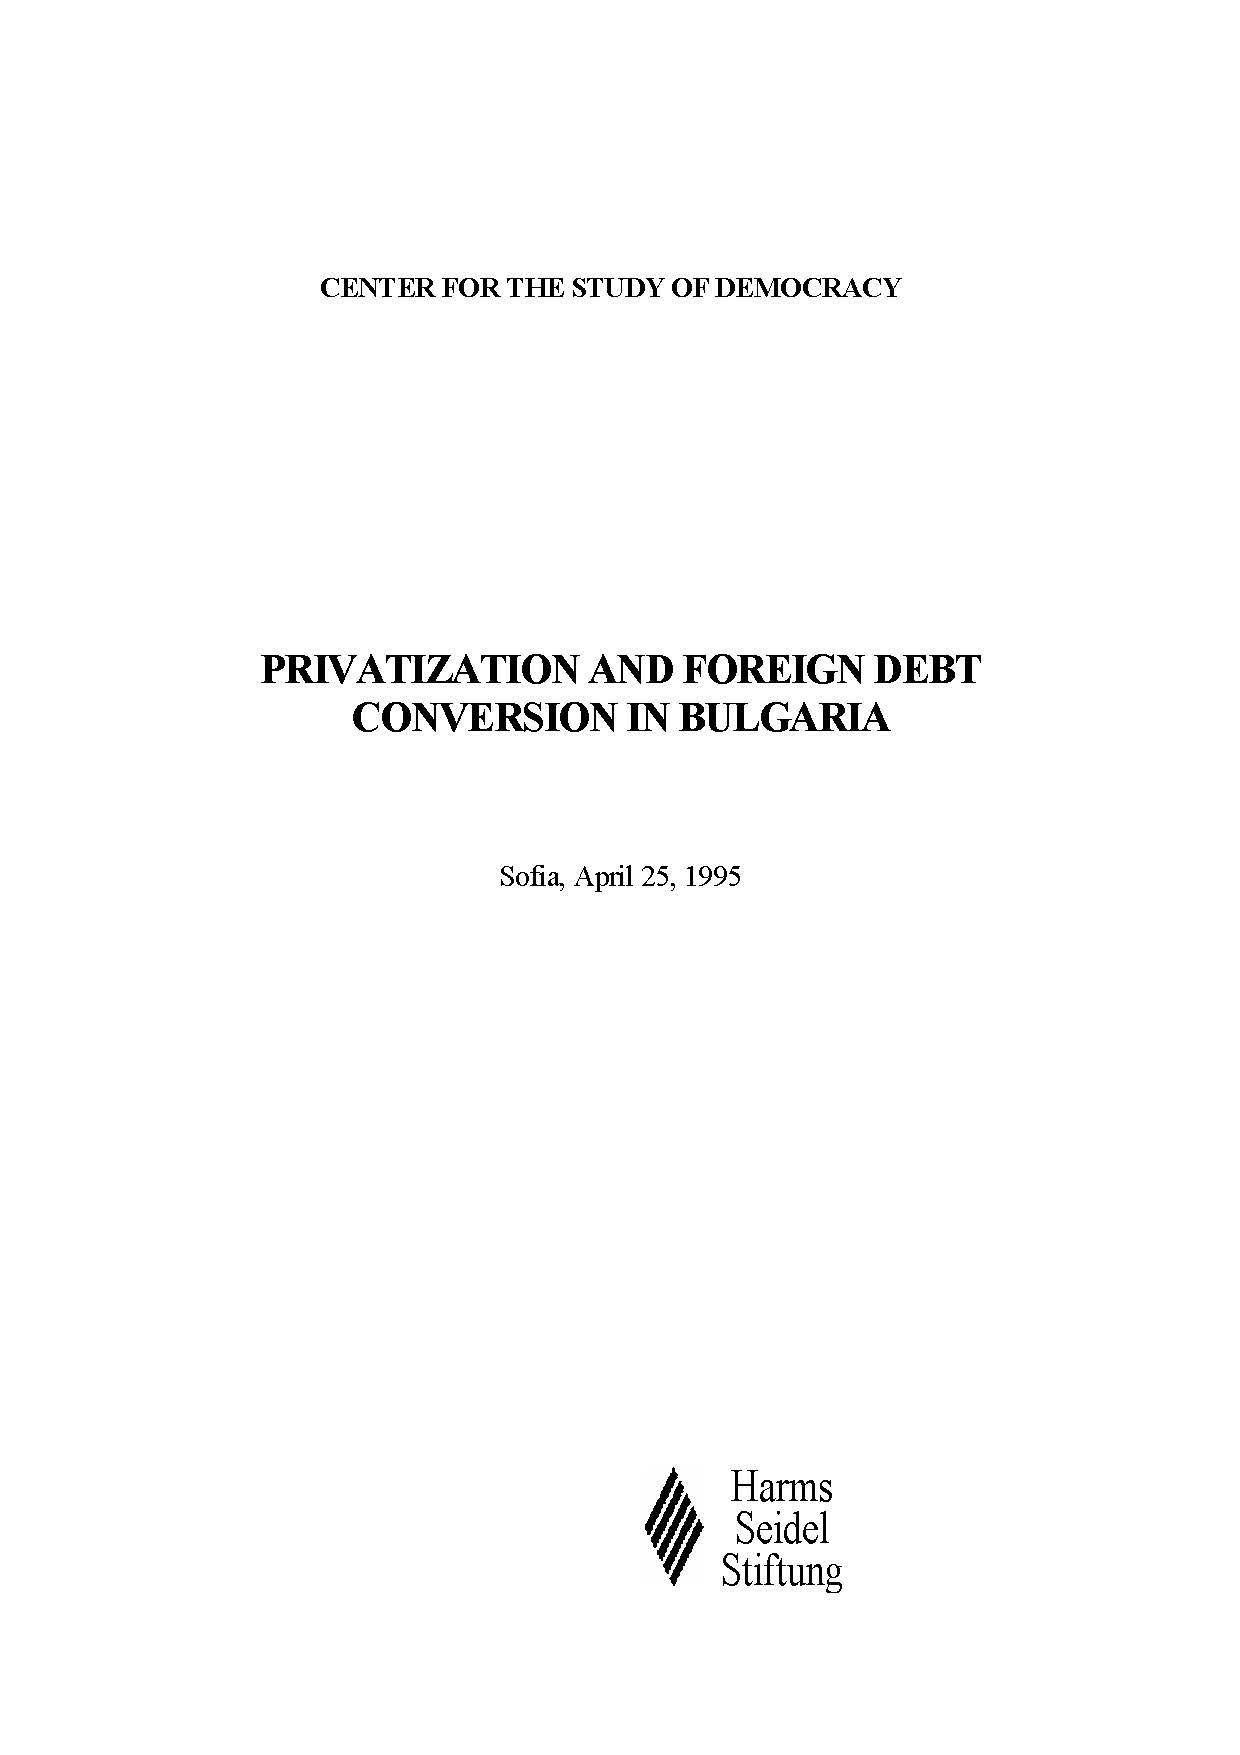 Privatization and Foreign Debt Conversion in Bulgaria